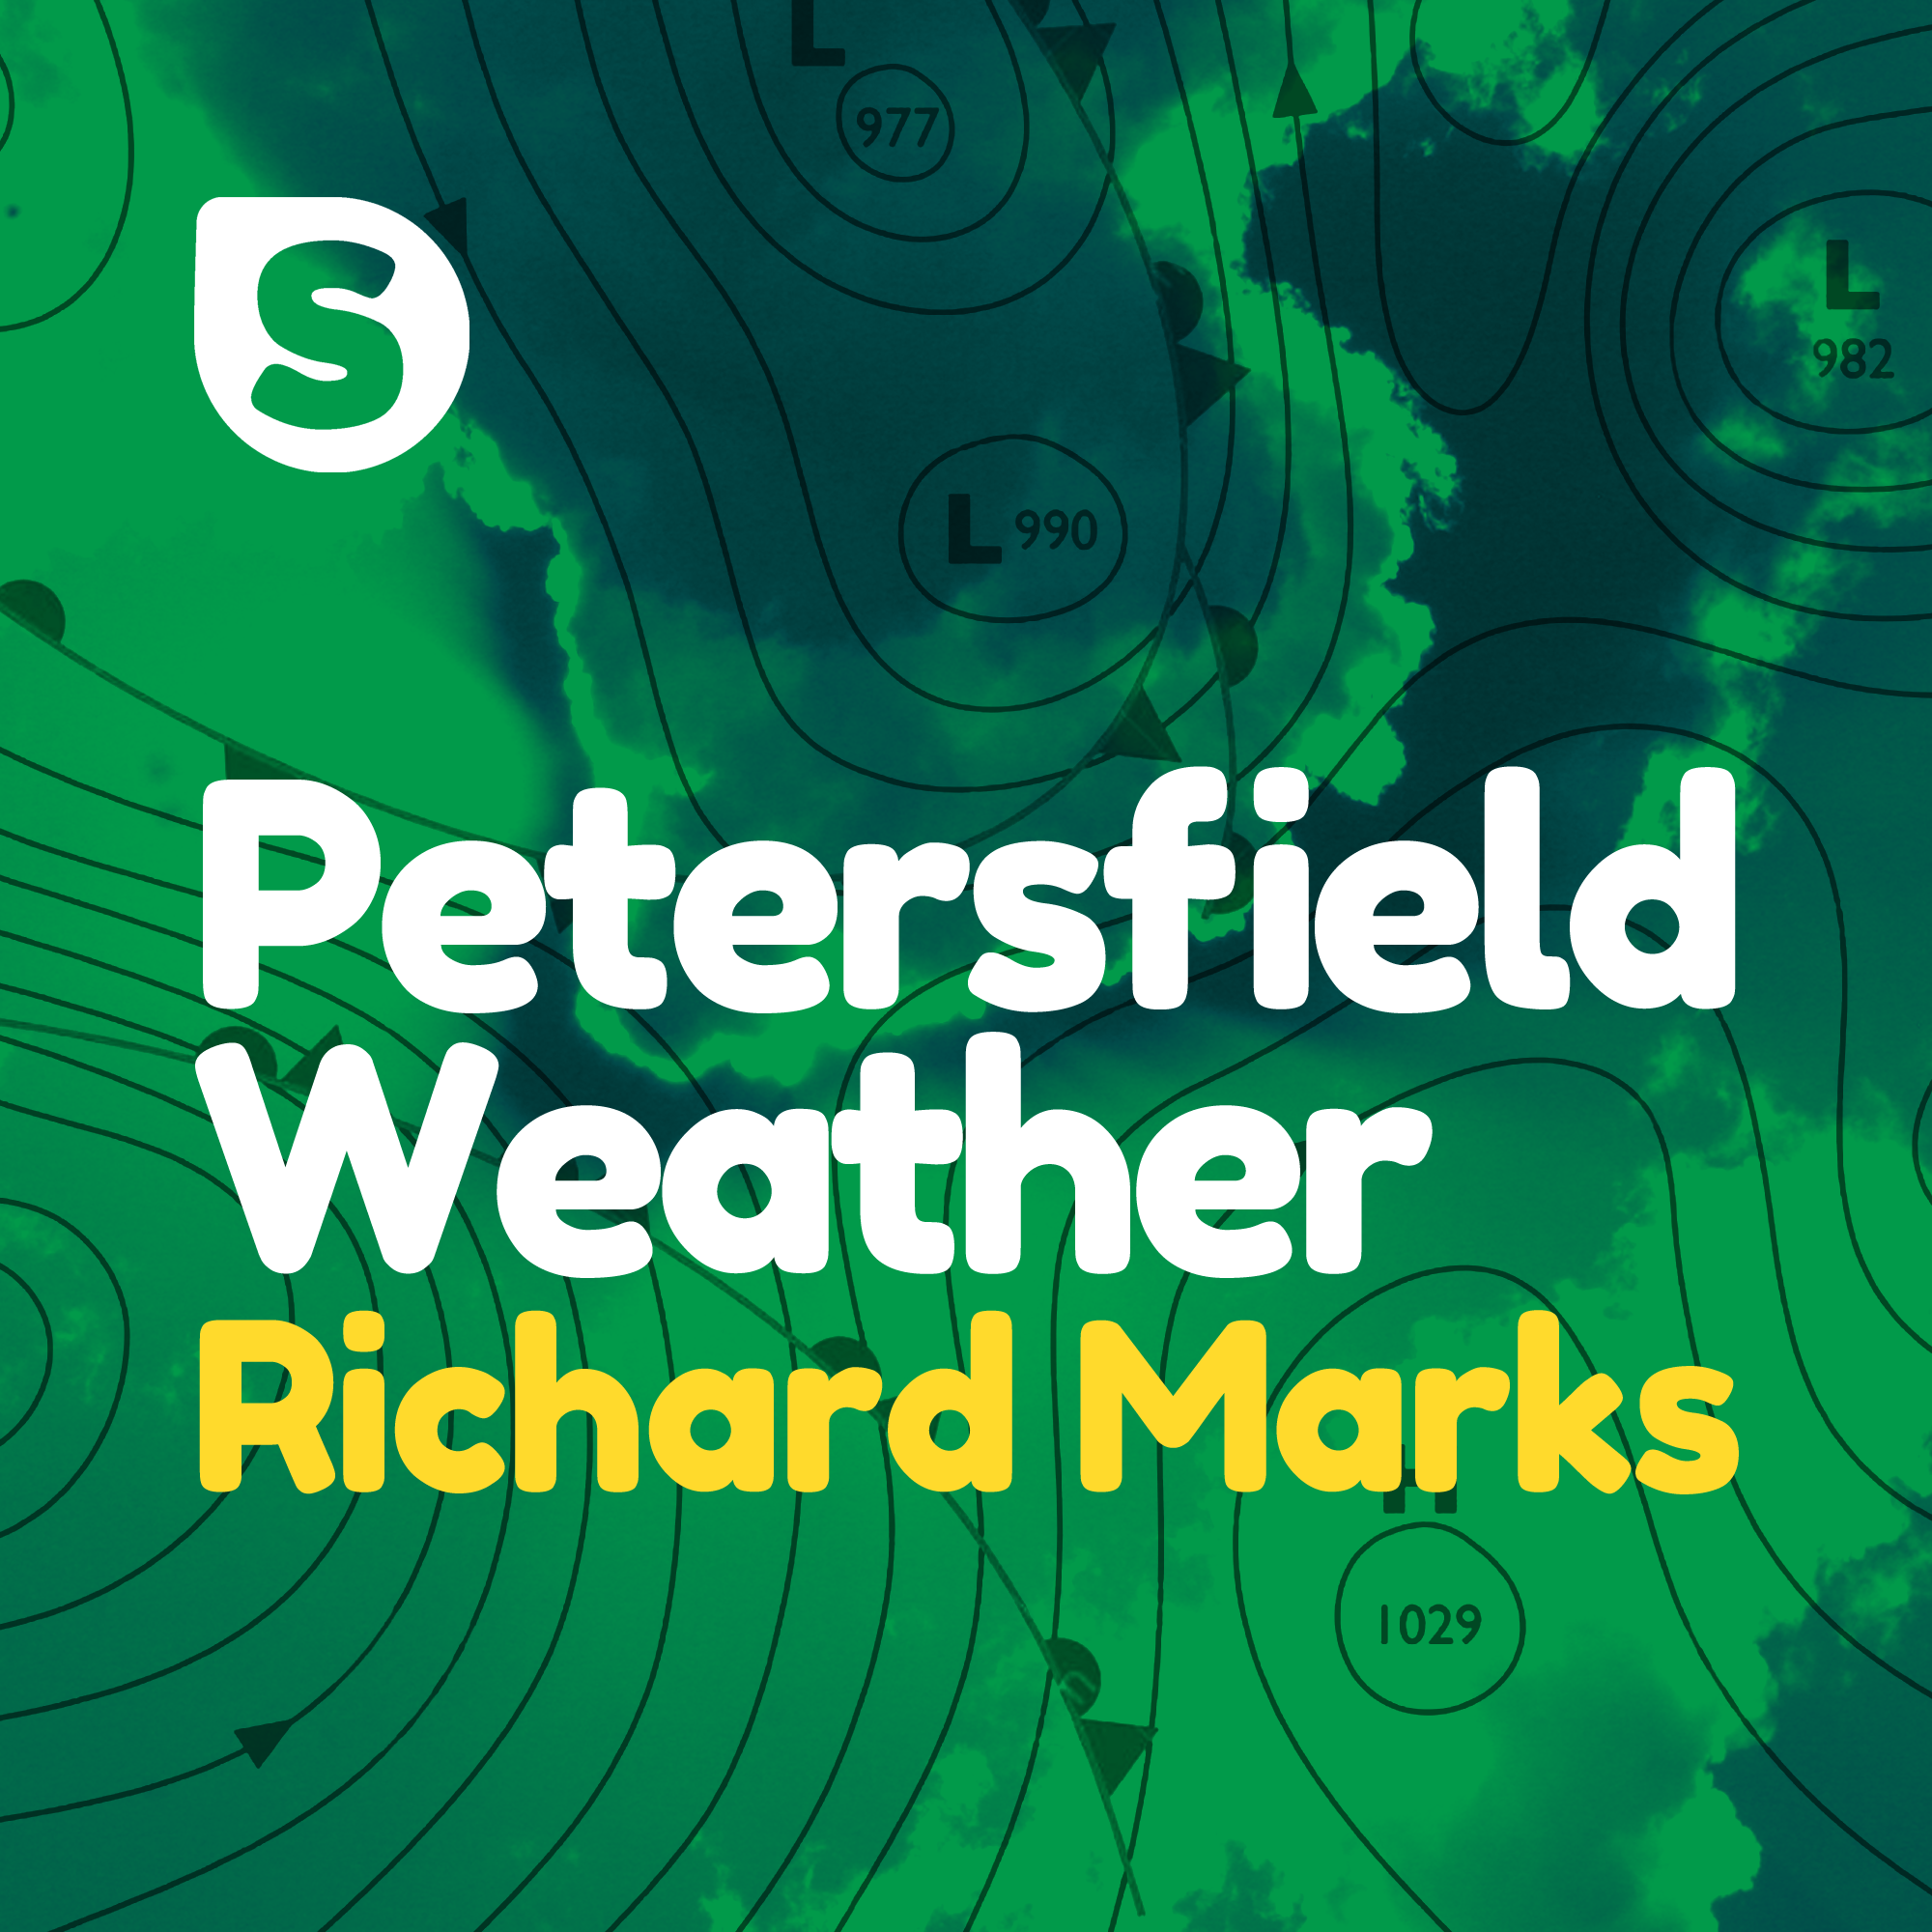 Richard looks ahead to our Christmas weather